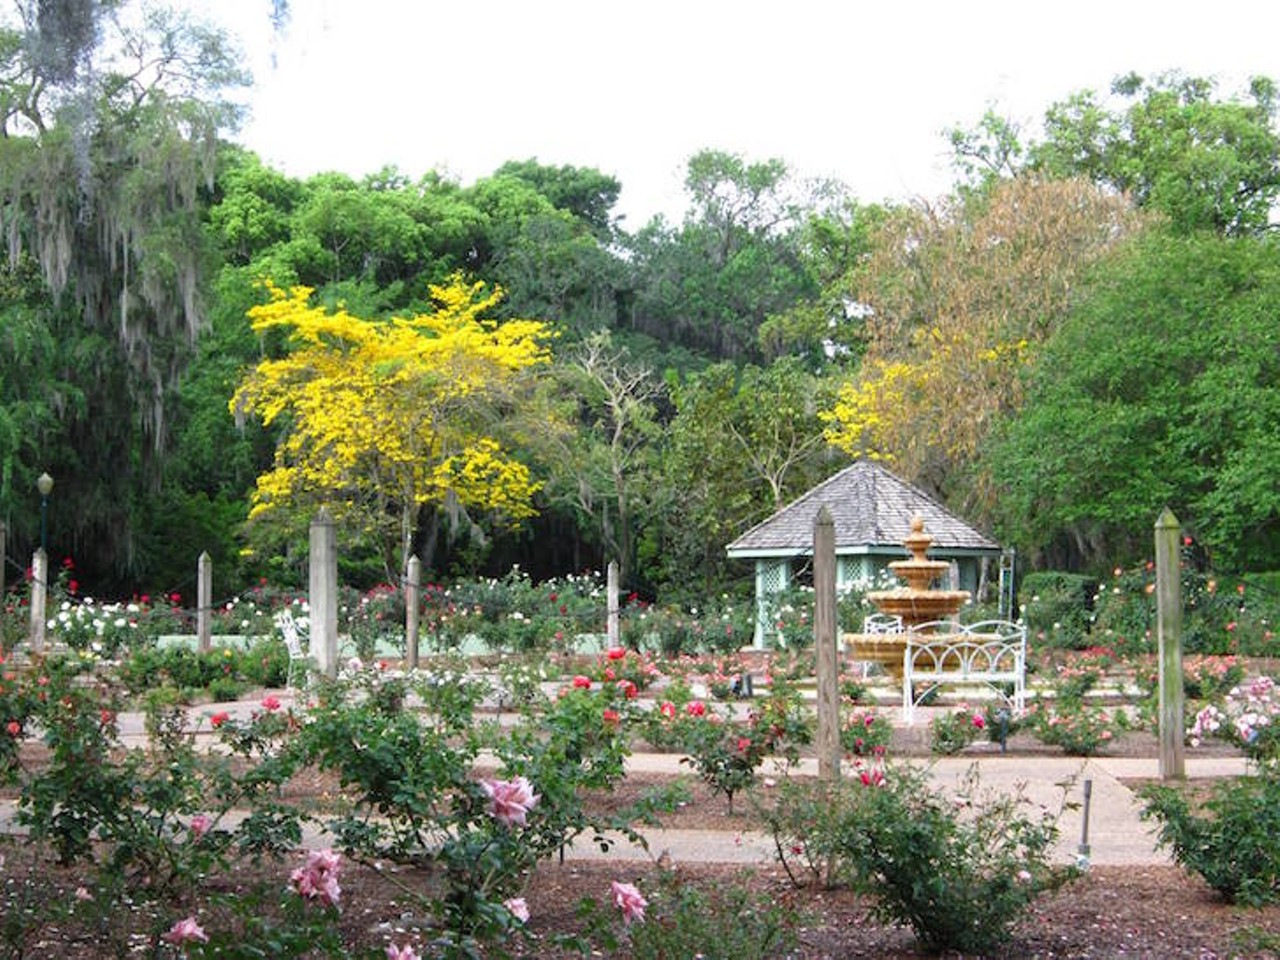 Go explore Orlando&#146;s botanical gardens
See the colorful, exotic plants and shady trees that surround Orlando (and all within driving distance) without feeling like you&#146;re actually in the Amazon. Take advantage of the cooler air and take that walk around all 50 acres of Leu Gardens or through the Legacy Greenhouse at Mead Botanical Garden.
Photo via Harry P. Leu Gardens/Facebook